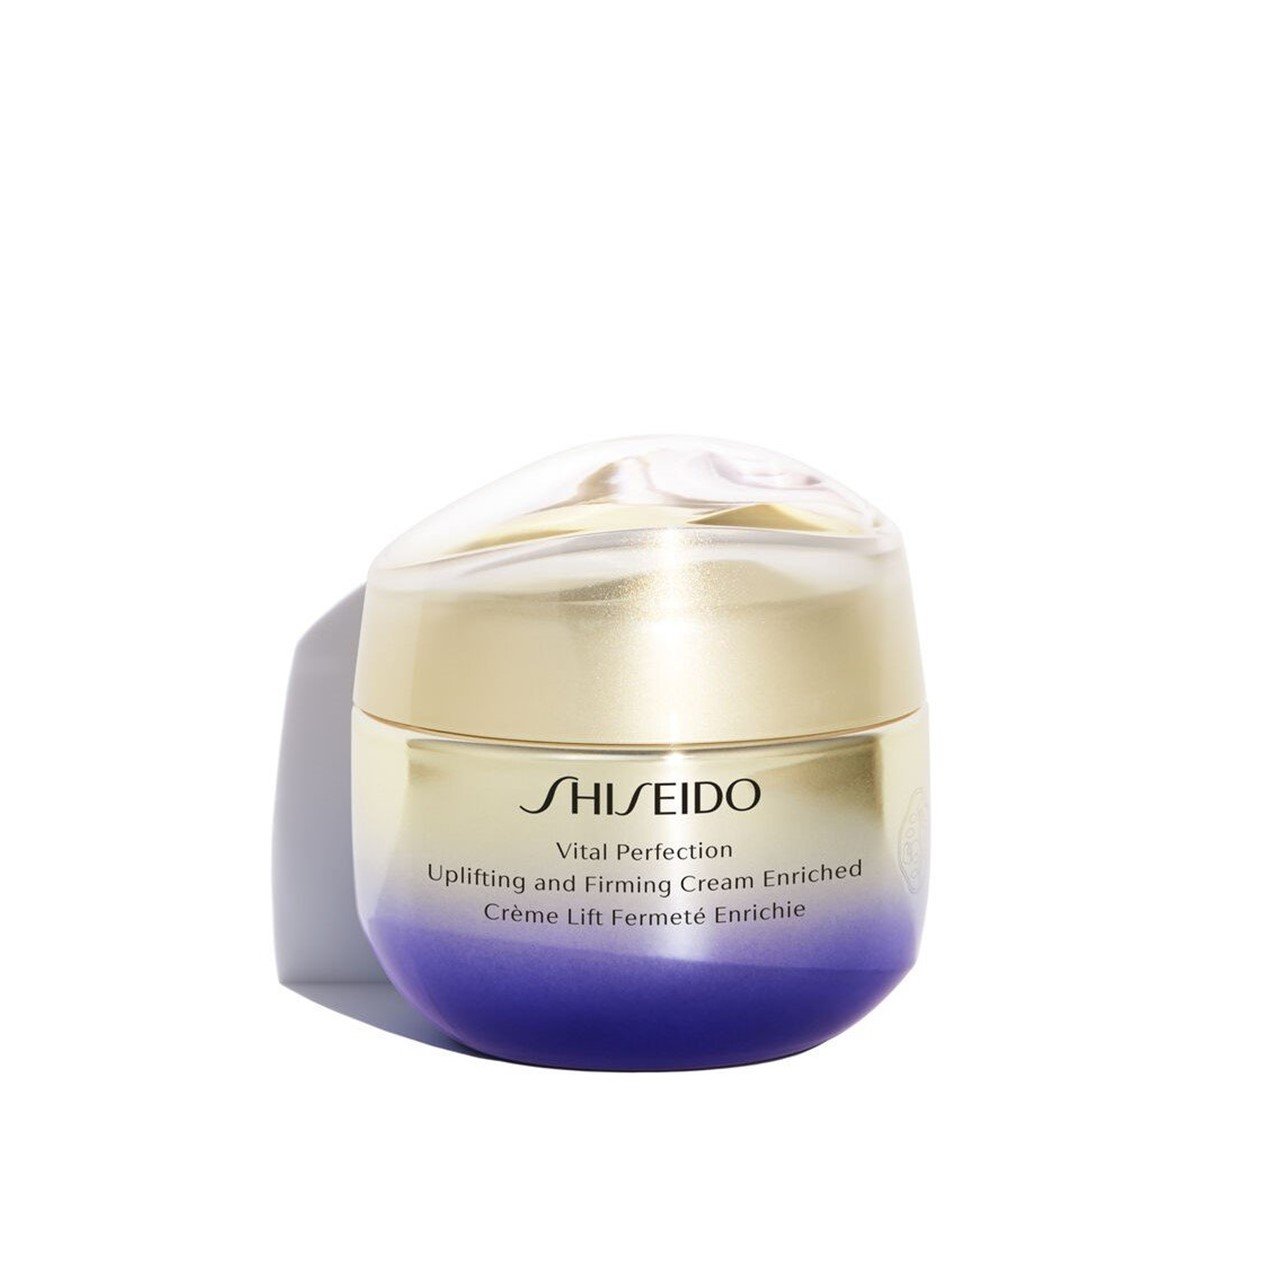 Shiseido Vital Perfection Uplifting and Firming Cream Enriched 50ml (1.69fl oz)